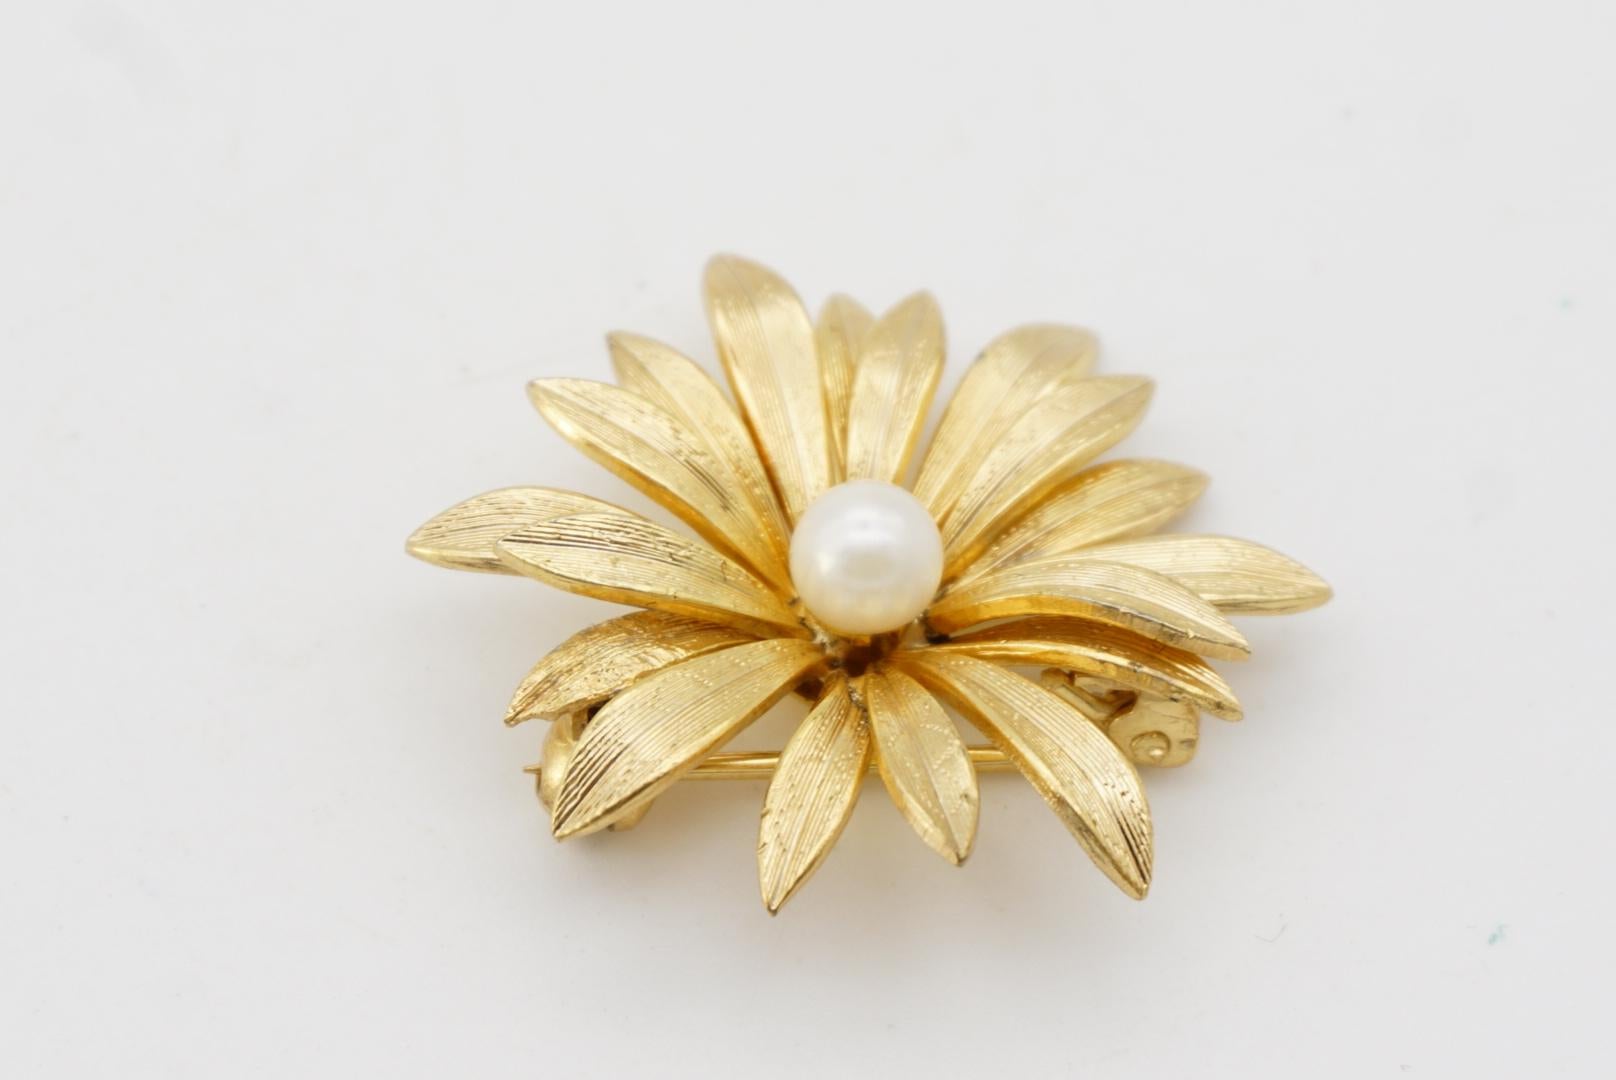 Christian Dior GROSSE 1967 Vintage Daisy Flower Blossom White Pearl Gold Brooch For Sale 5